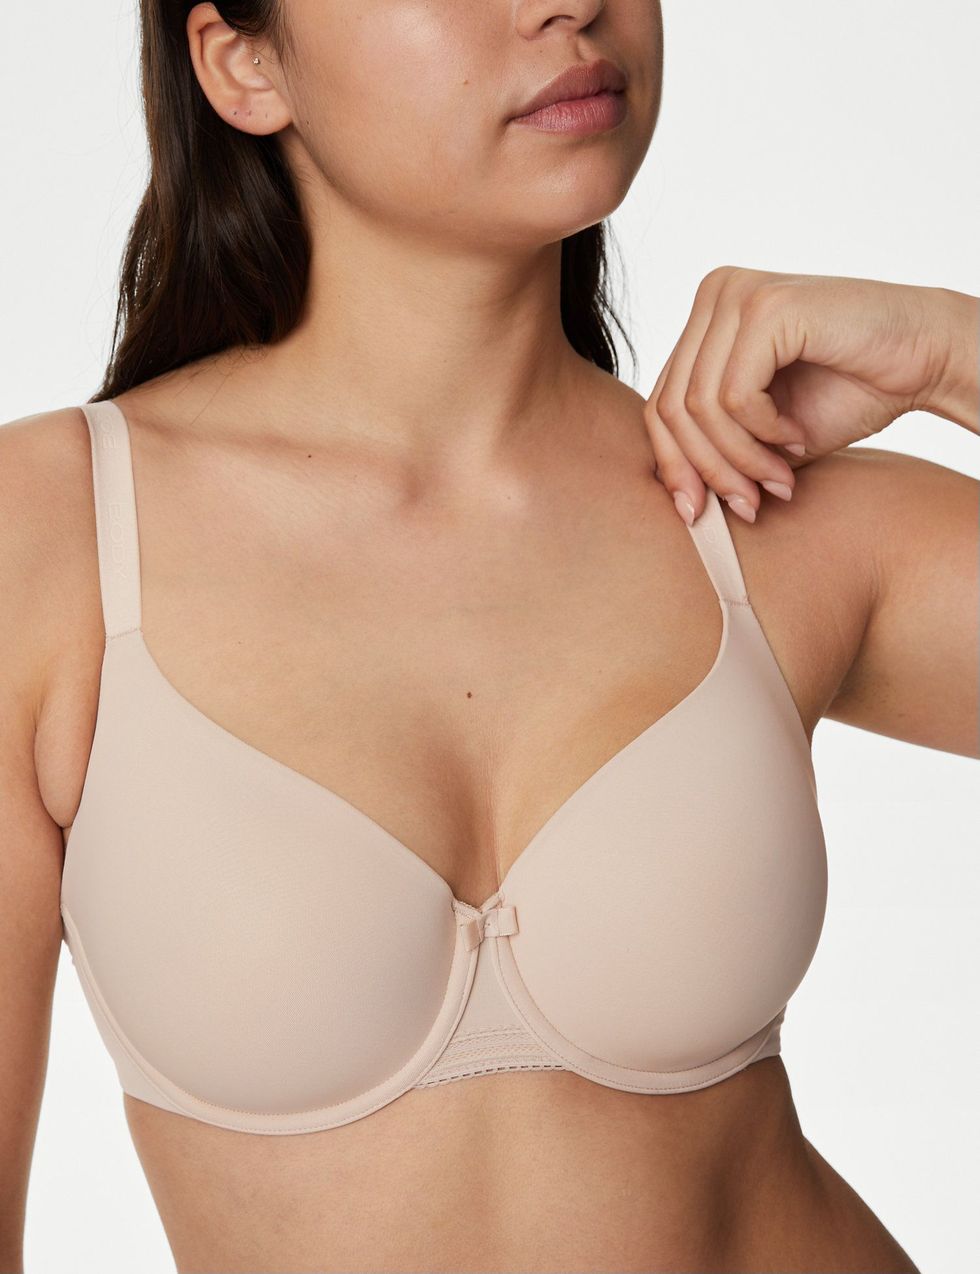 This bestselling M&S bra is perfect for everyday wear